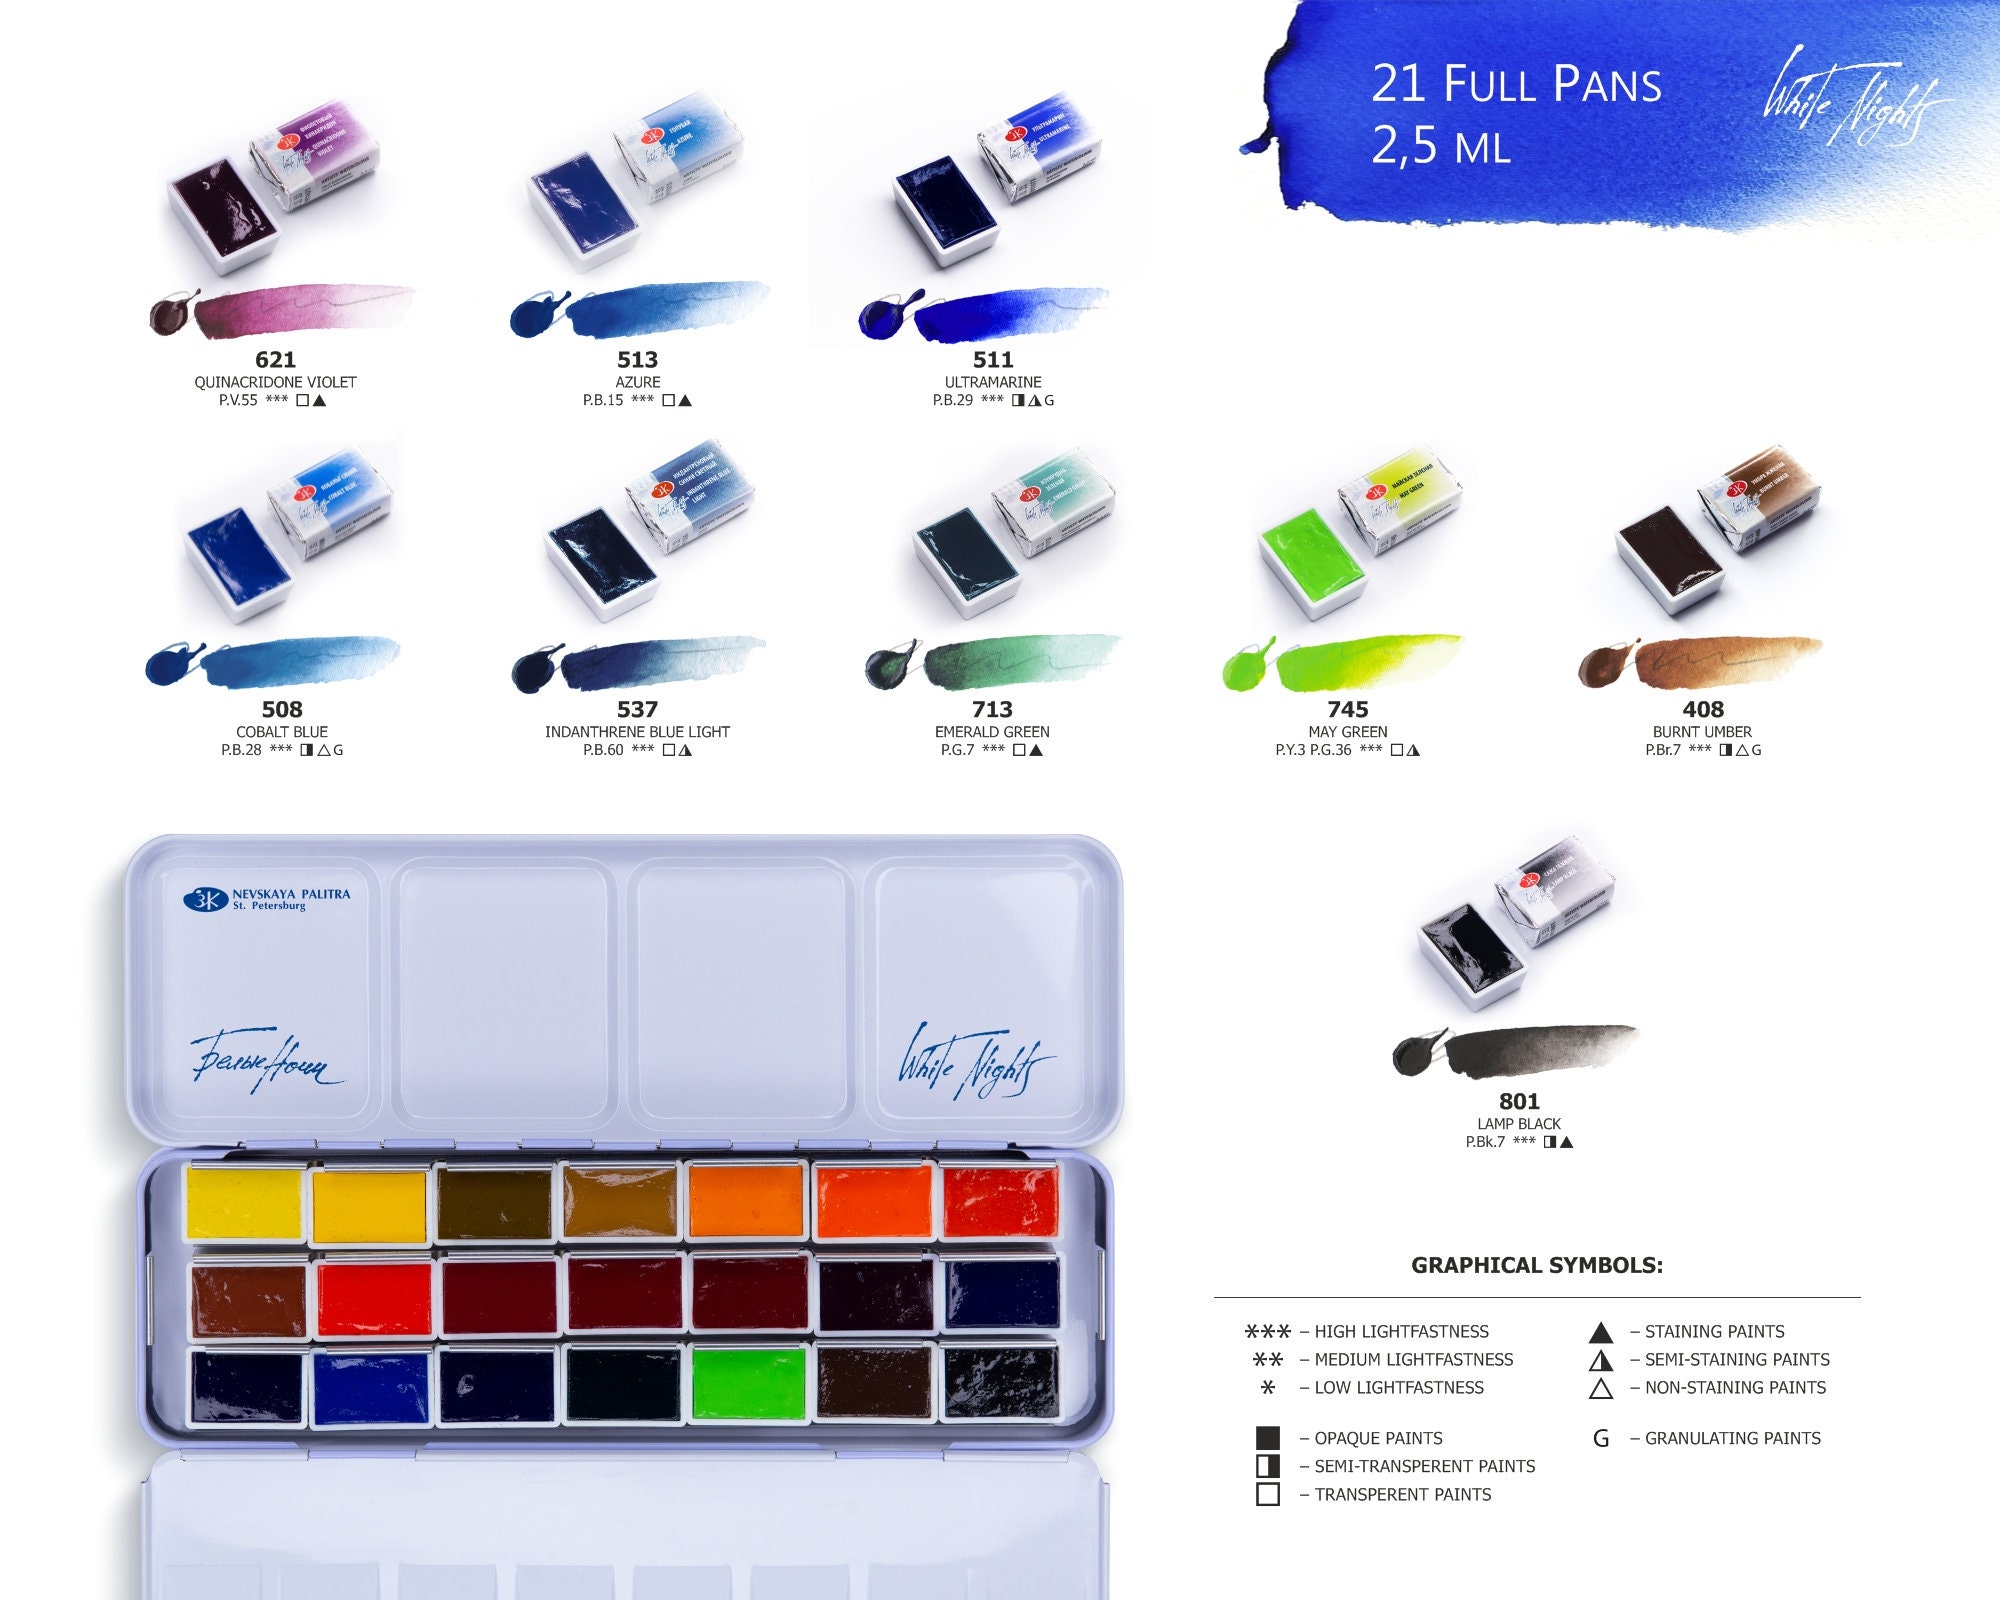  White Nights Extra Fine Artists Grade Professional Watercolor  Set 24 full 2.5ml Pans in Plastic Box by Nevskaya Palitra